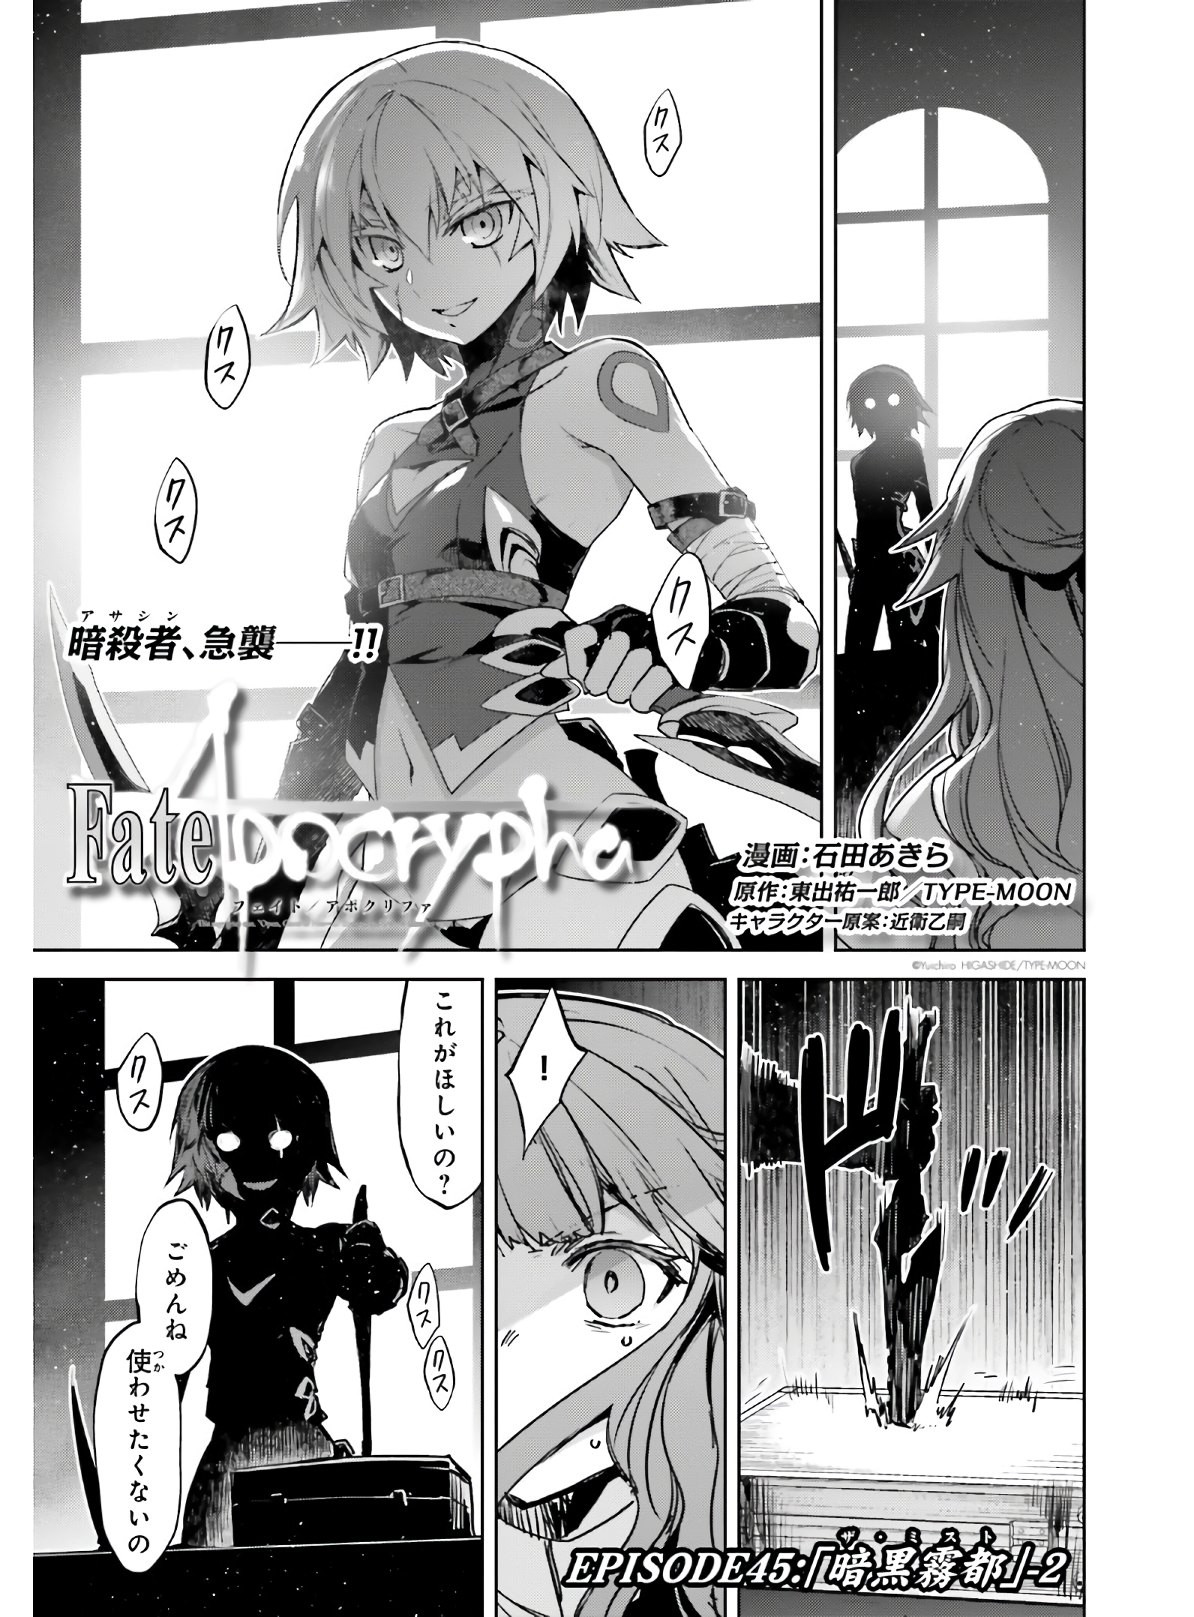 Fate-Apocrypha - Chapter 45-2 - Page 1